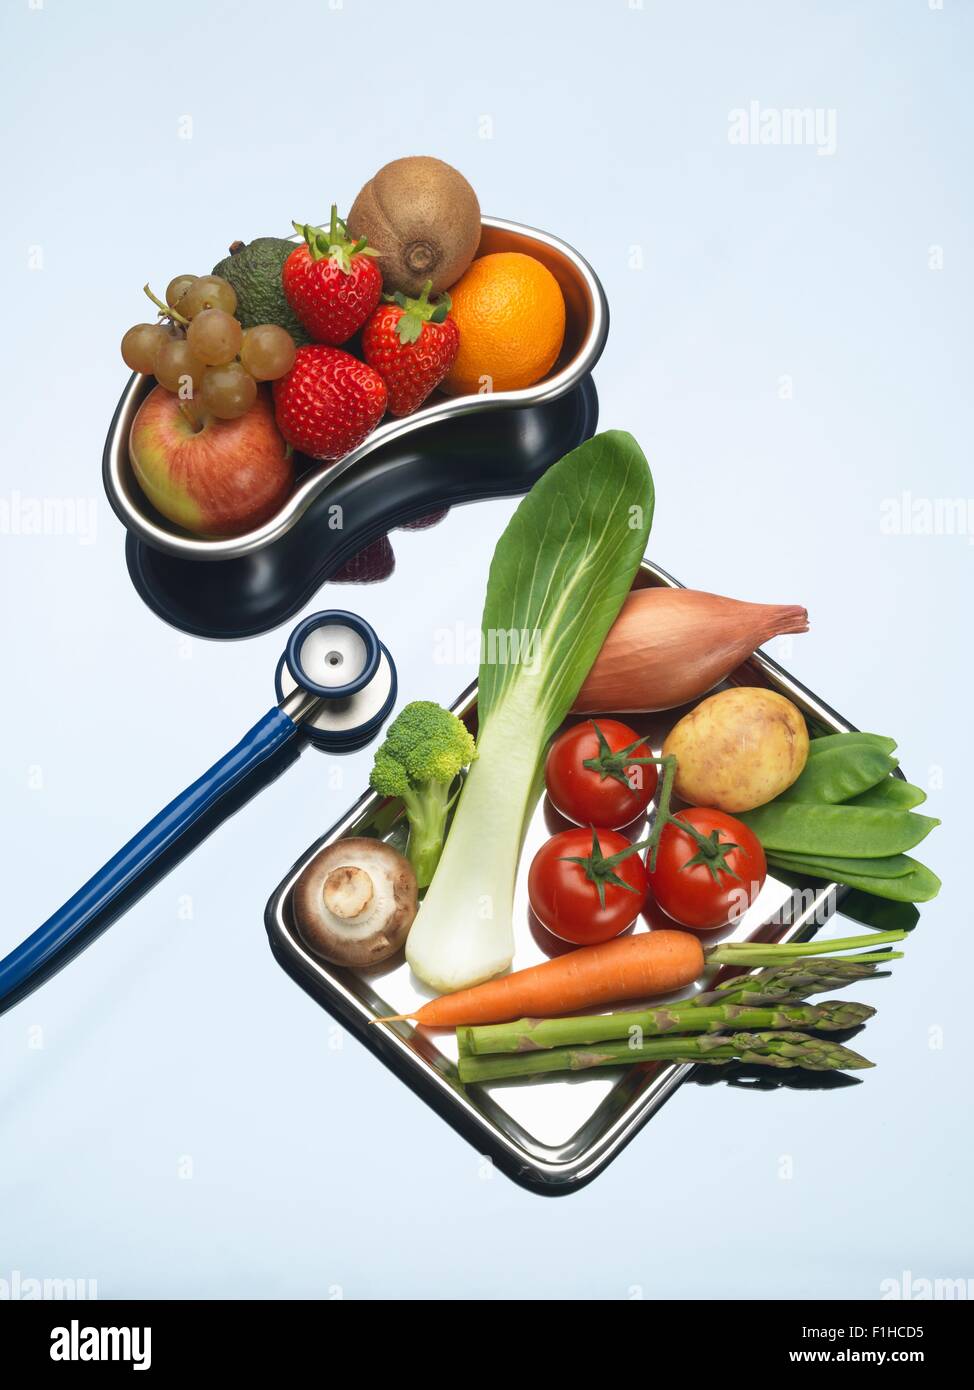 Stethoscope between trays of fresh fruits and vegetables Stock Photo